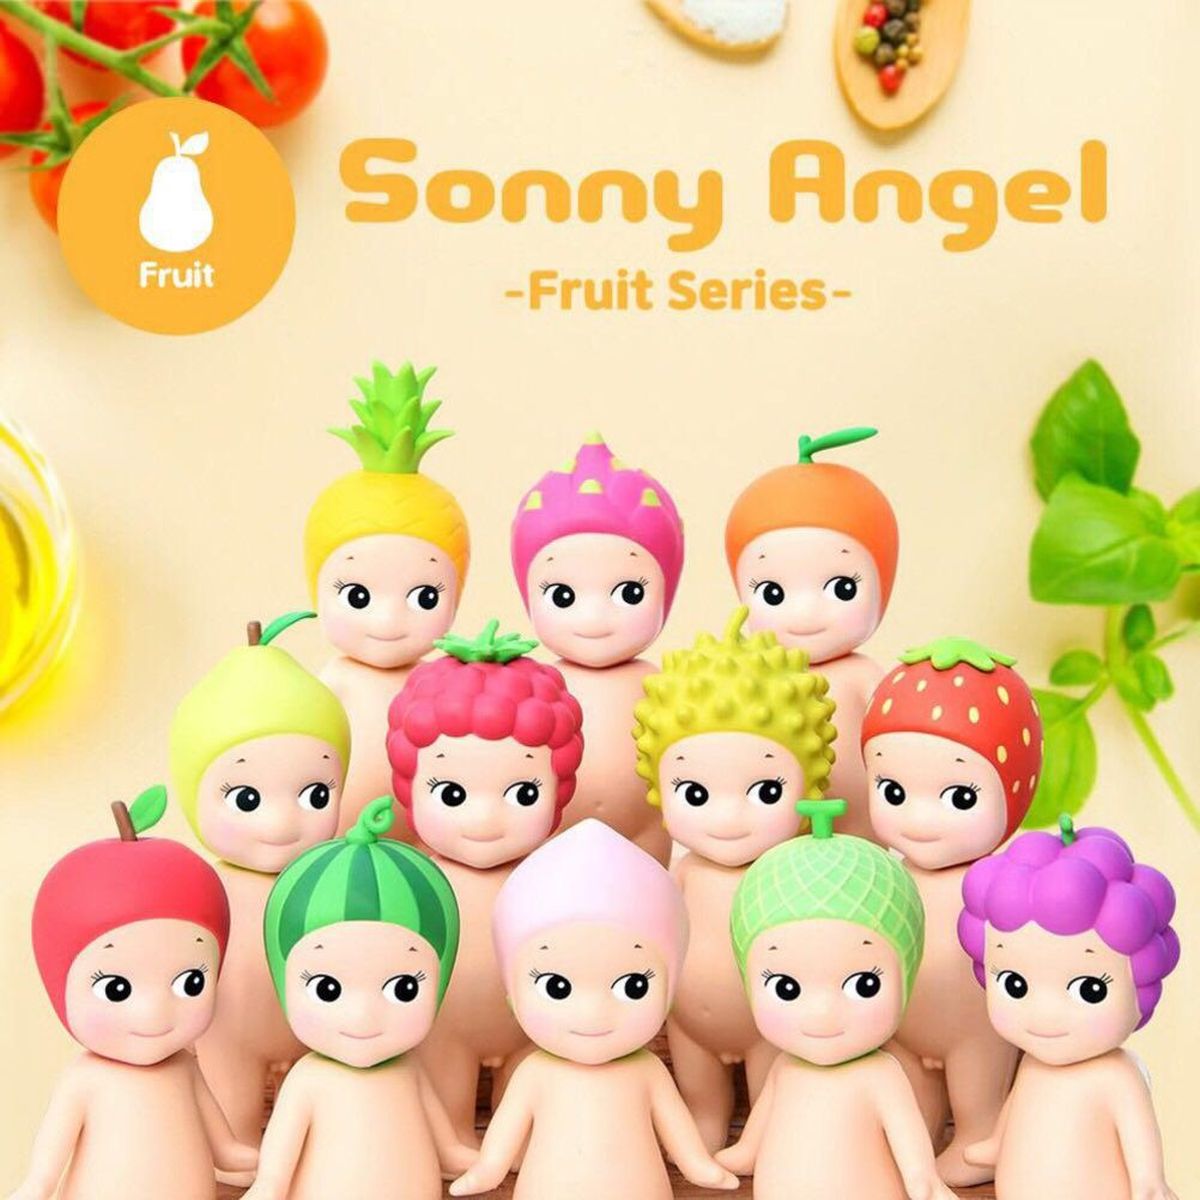 Une Figurine Sonny Angel Srie Fruits 2019